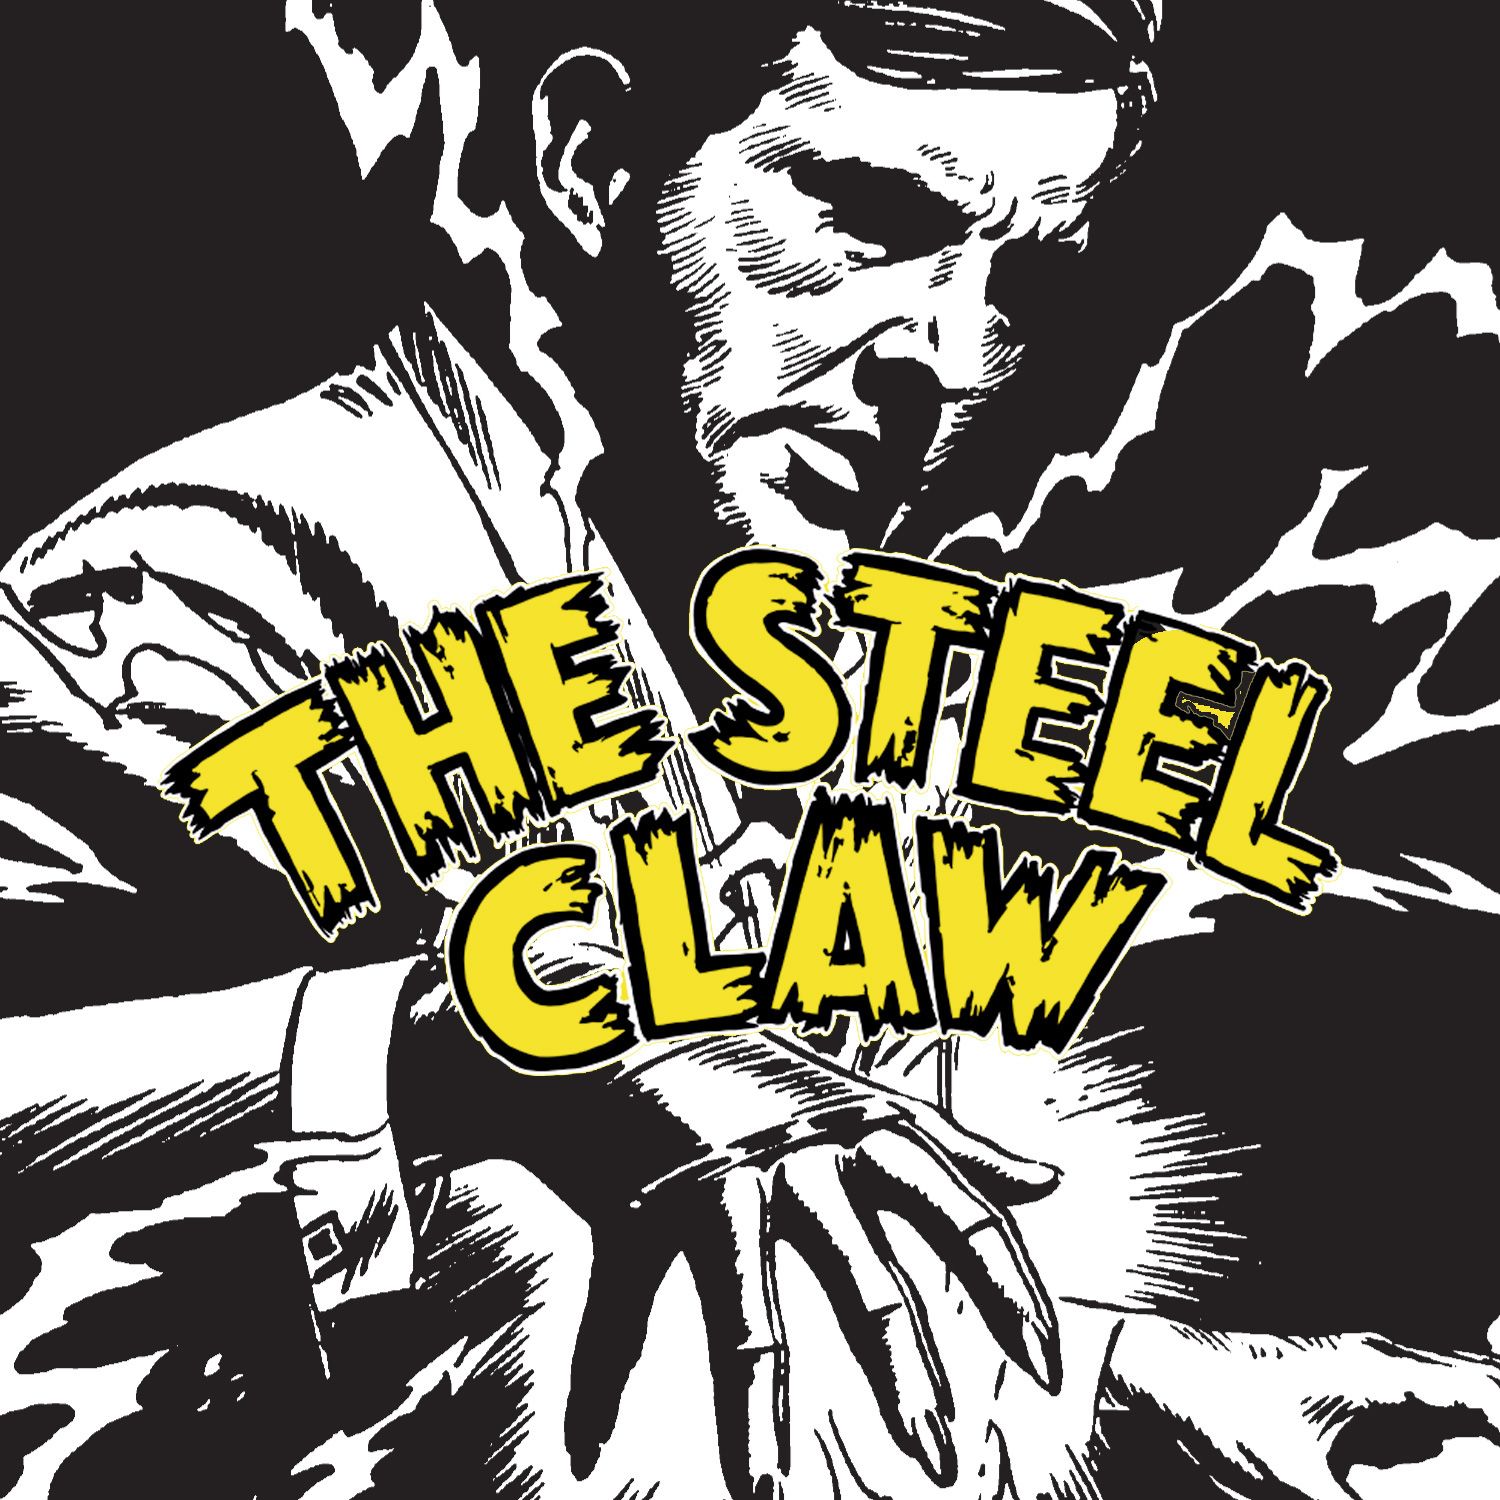 Thrilling! Incredible! Weird! Who is The Steel Claw?